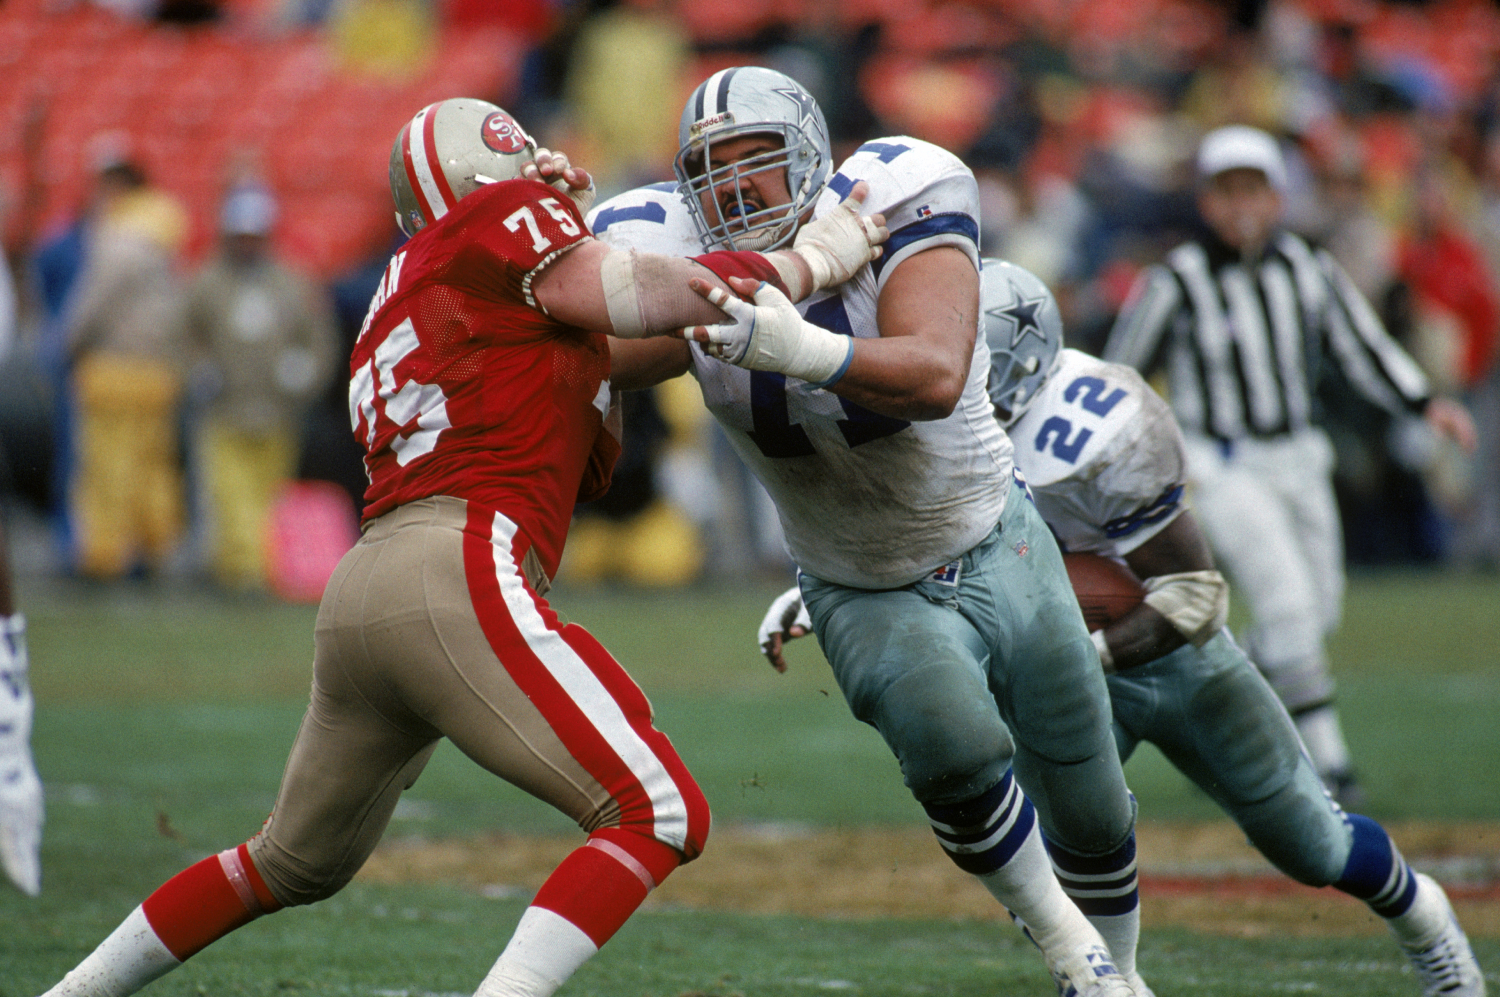 Mark Tuinei helped lead the Dallas Cowboys' o-line when they won three Super Bowls in four years. He tragically died soon after his career.